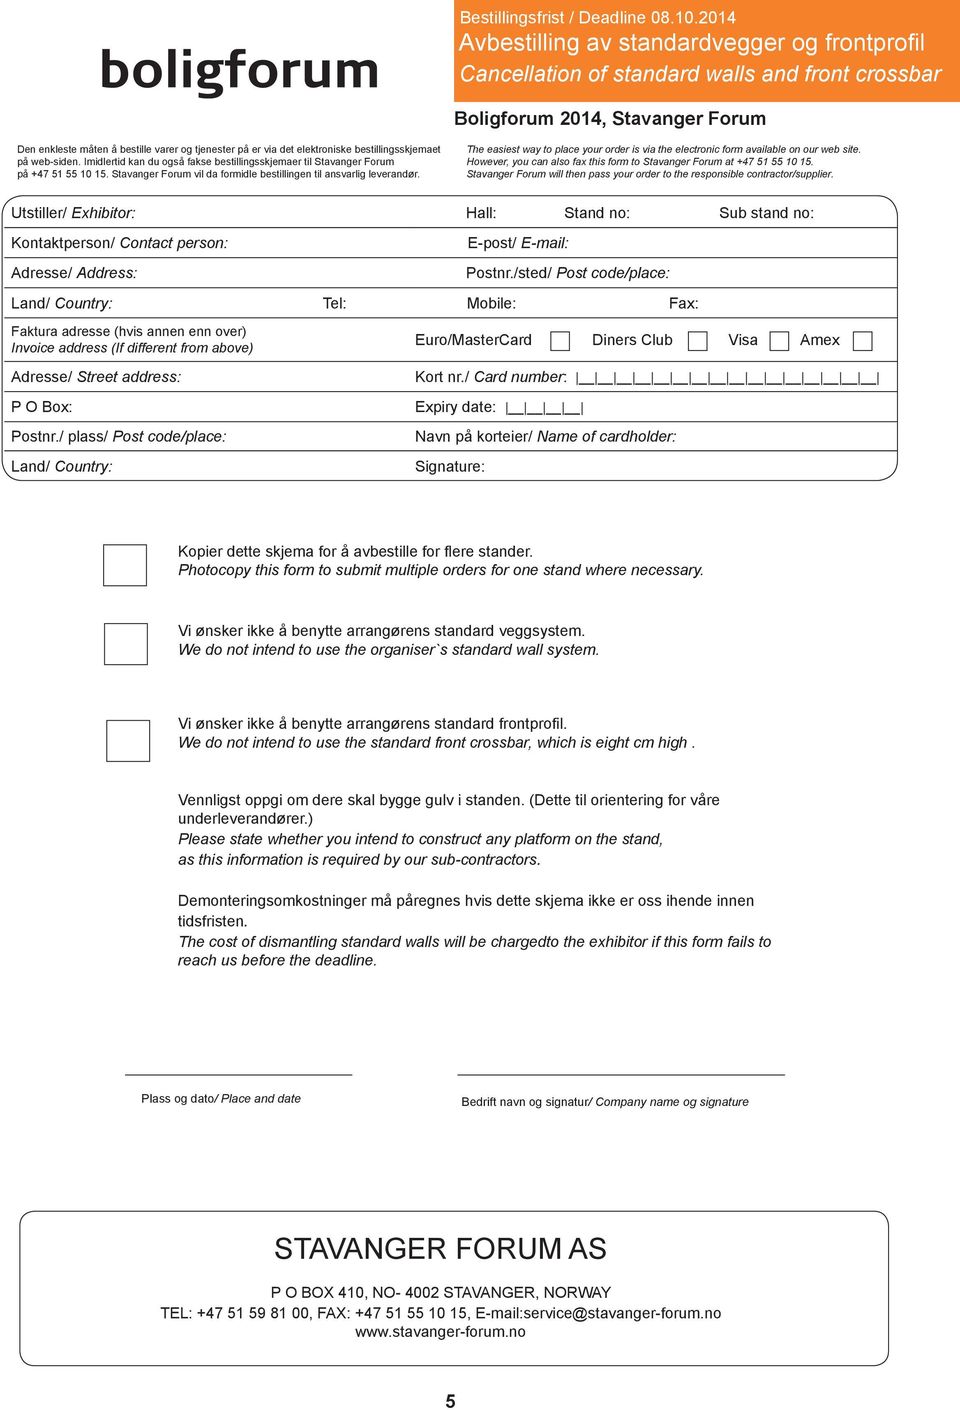 Photocopy this form to submit multiple orders for one stand where necessary. Vi ønsker ikke å benytte arrangørens standard veggsystem. We do not intend to use the organiser`s standard wall system.